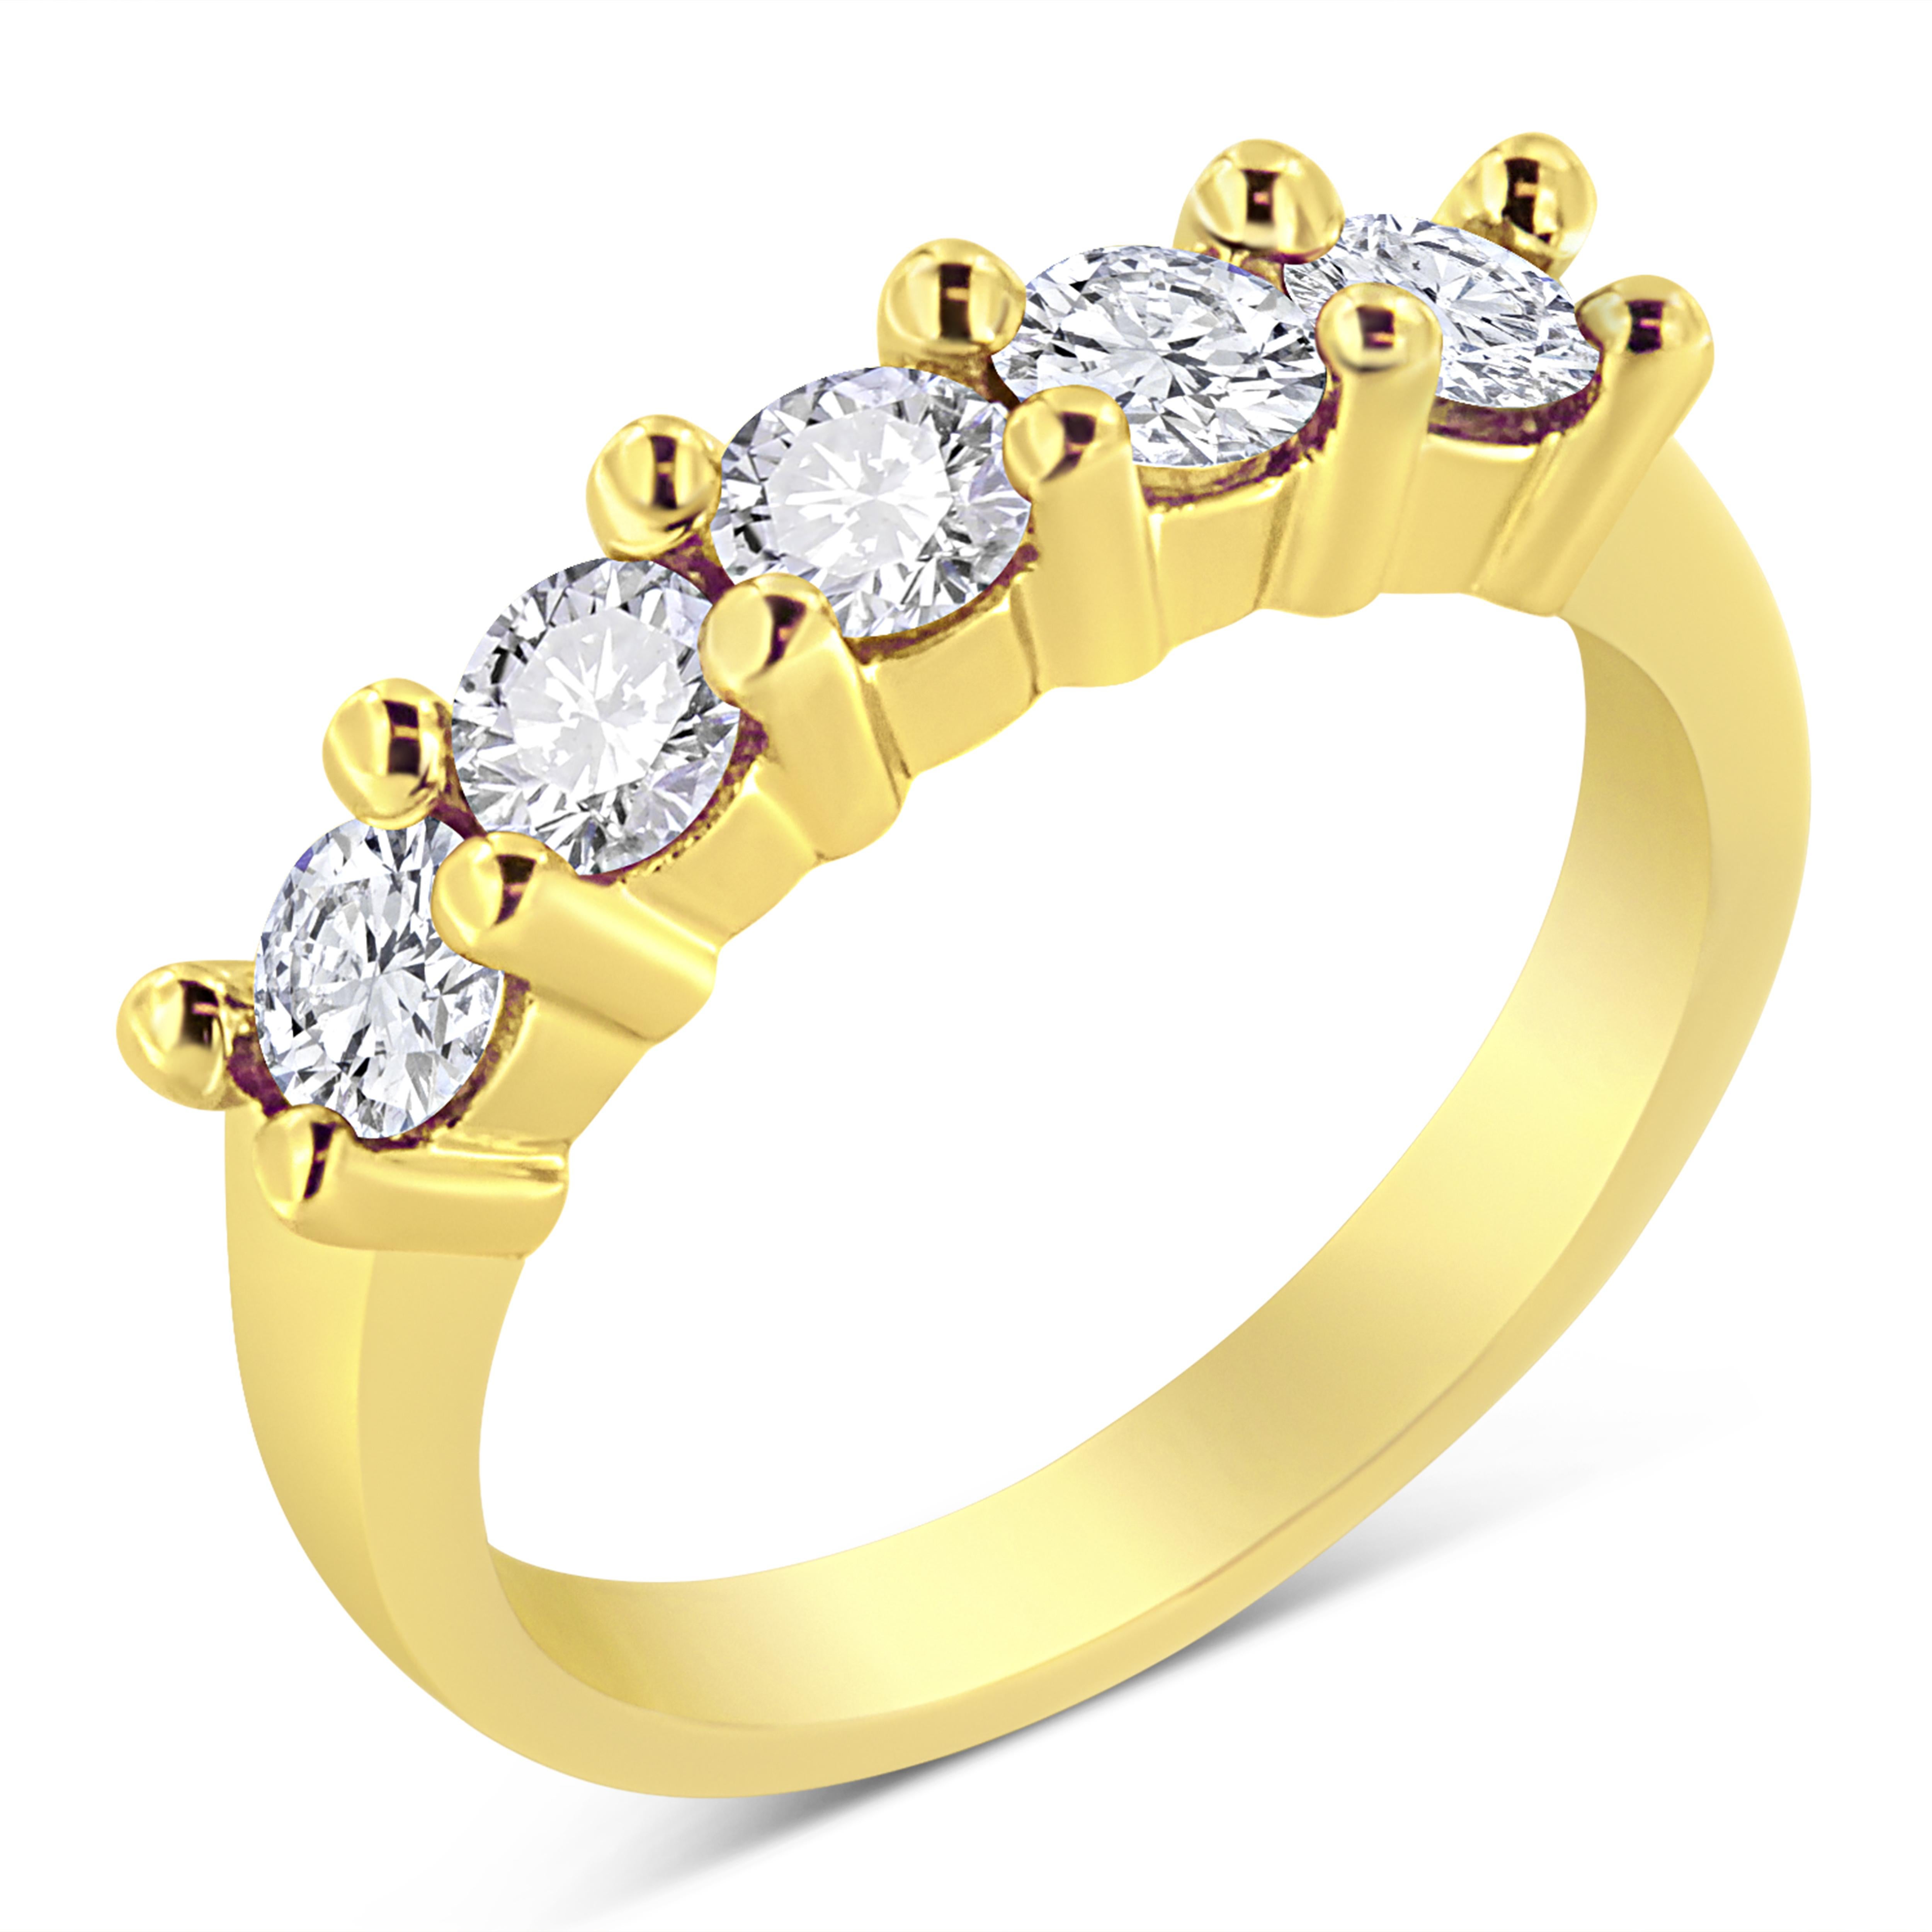 For Sale:  14k Yellow Gold Plated .925 Sterling Silver 1.0 Carat Diamond 5 Stone Band Ring 2